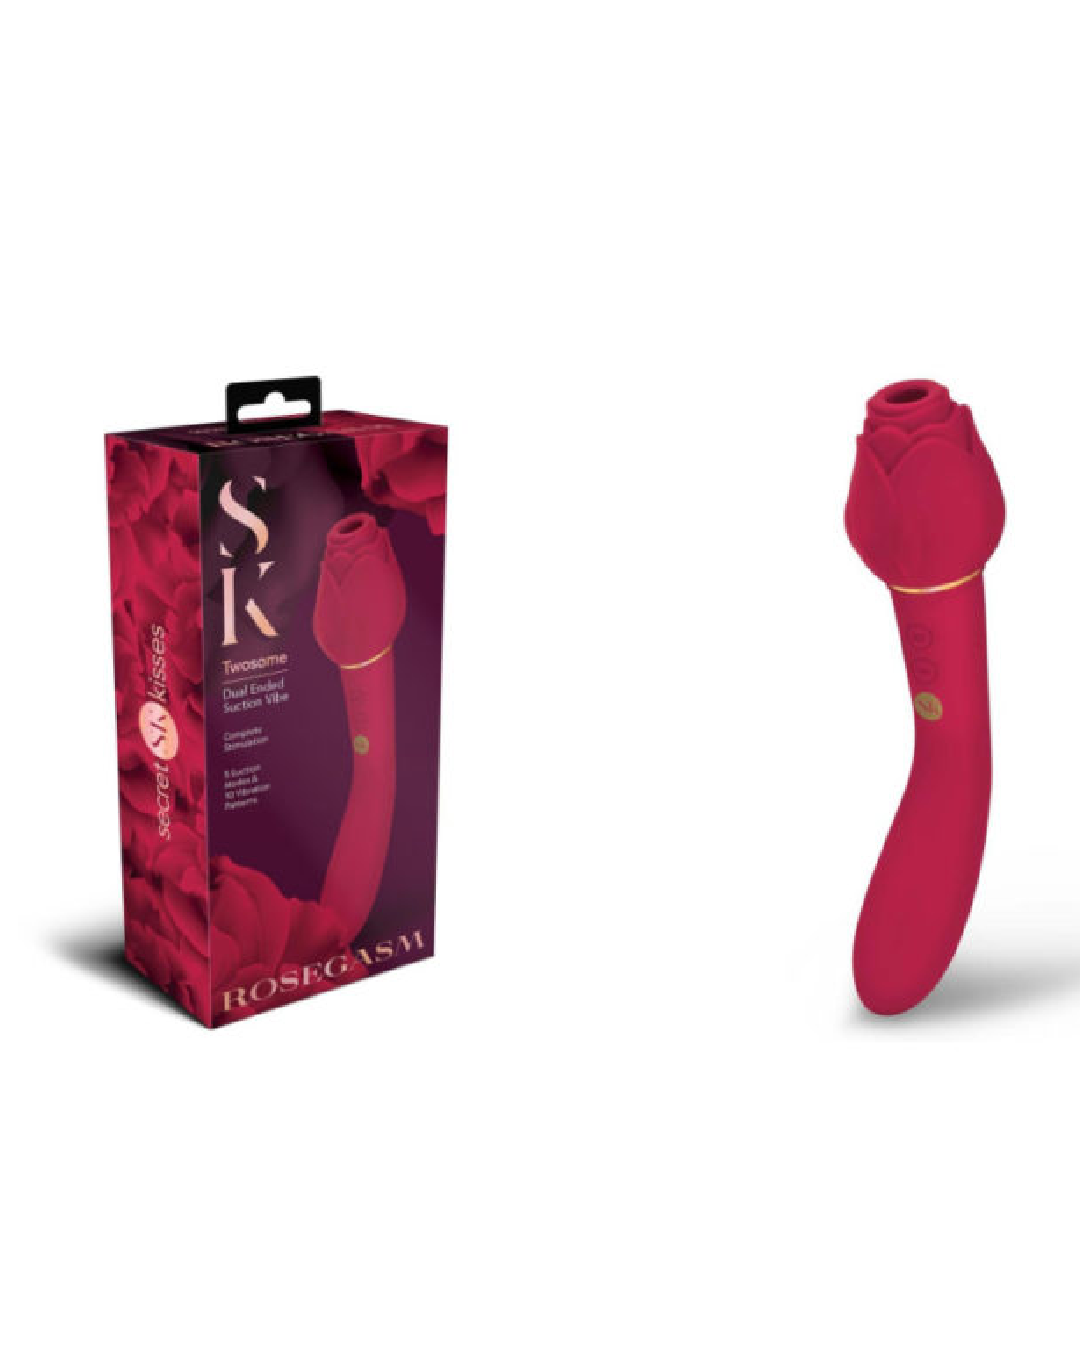 Rosegasm Twosome Double Ended Air Pulsation Vibrator next to box 